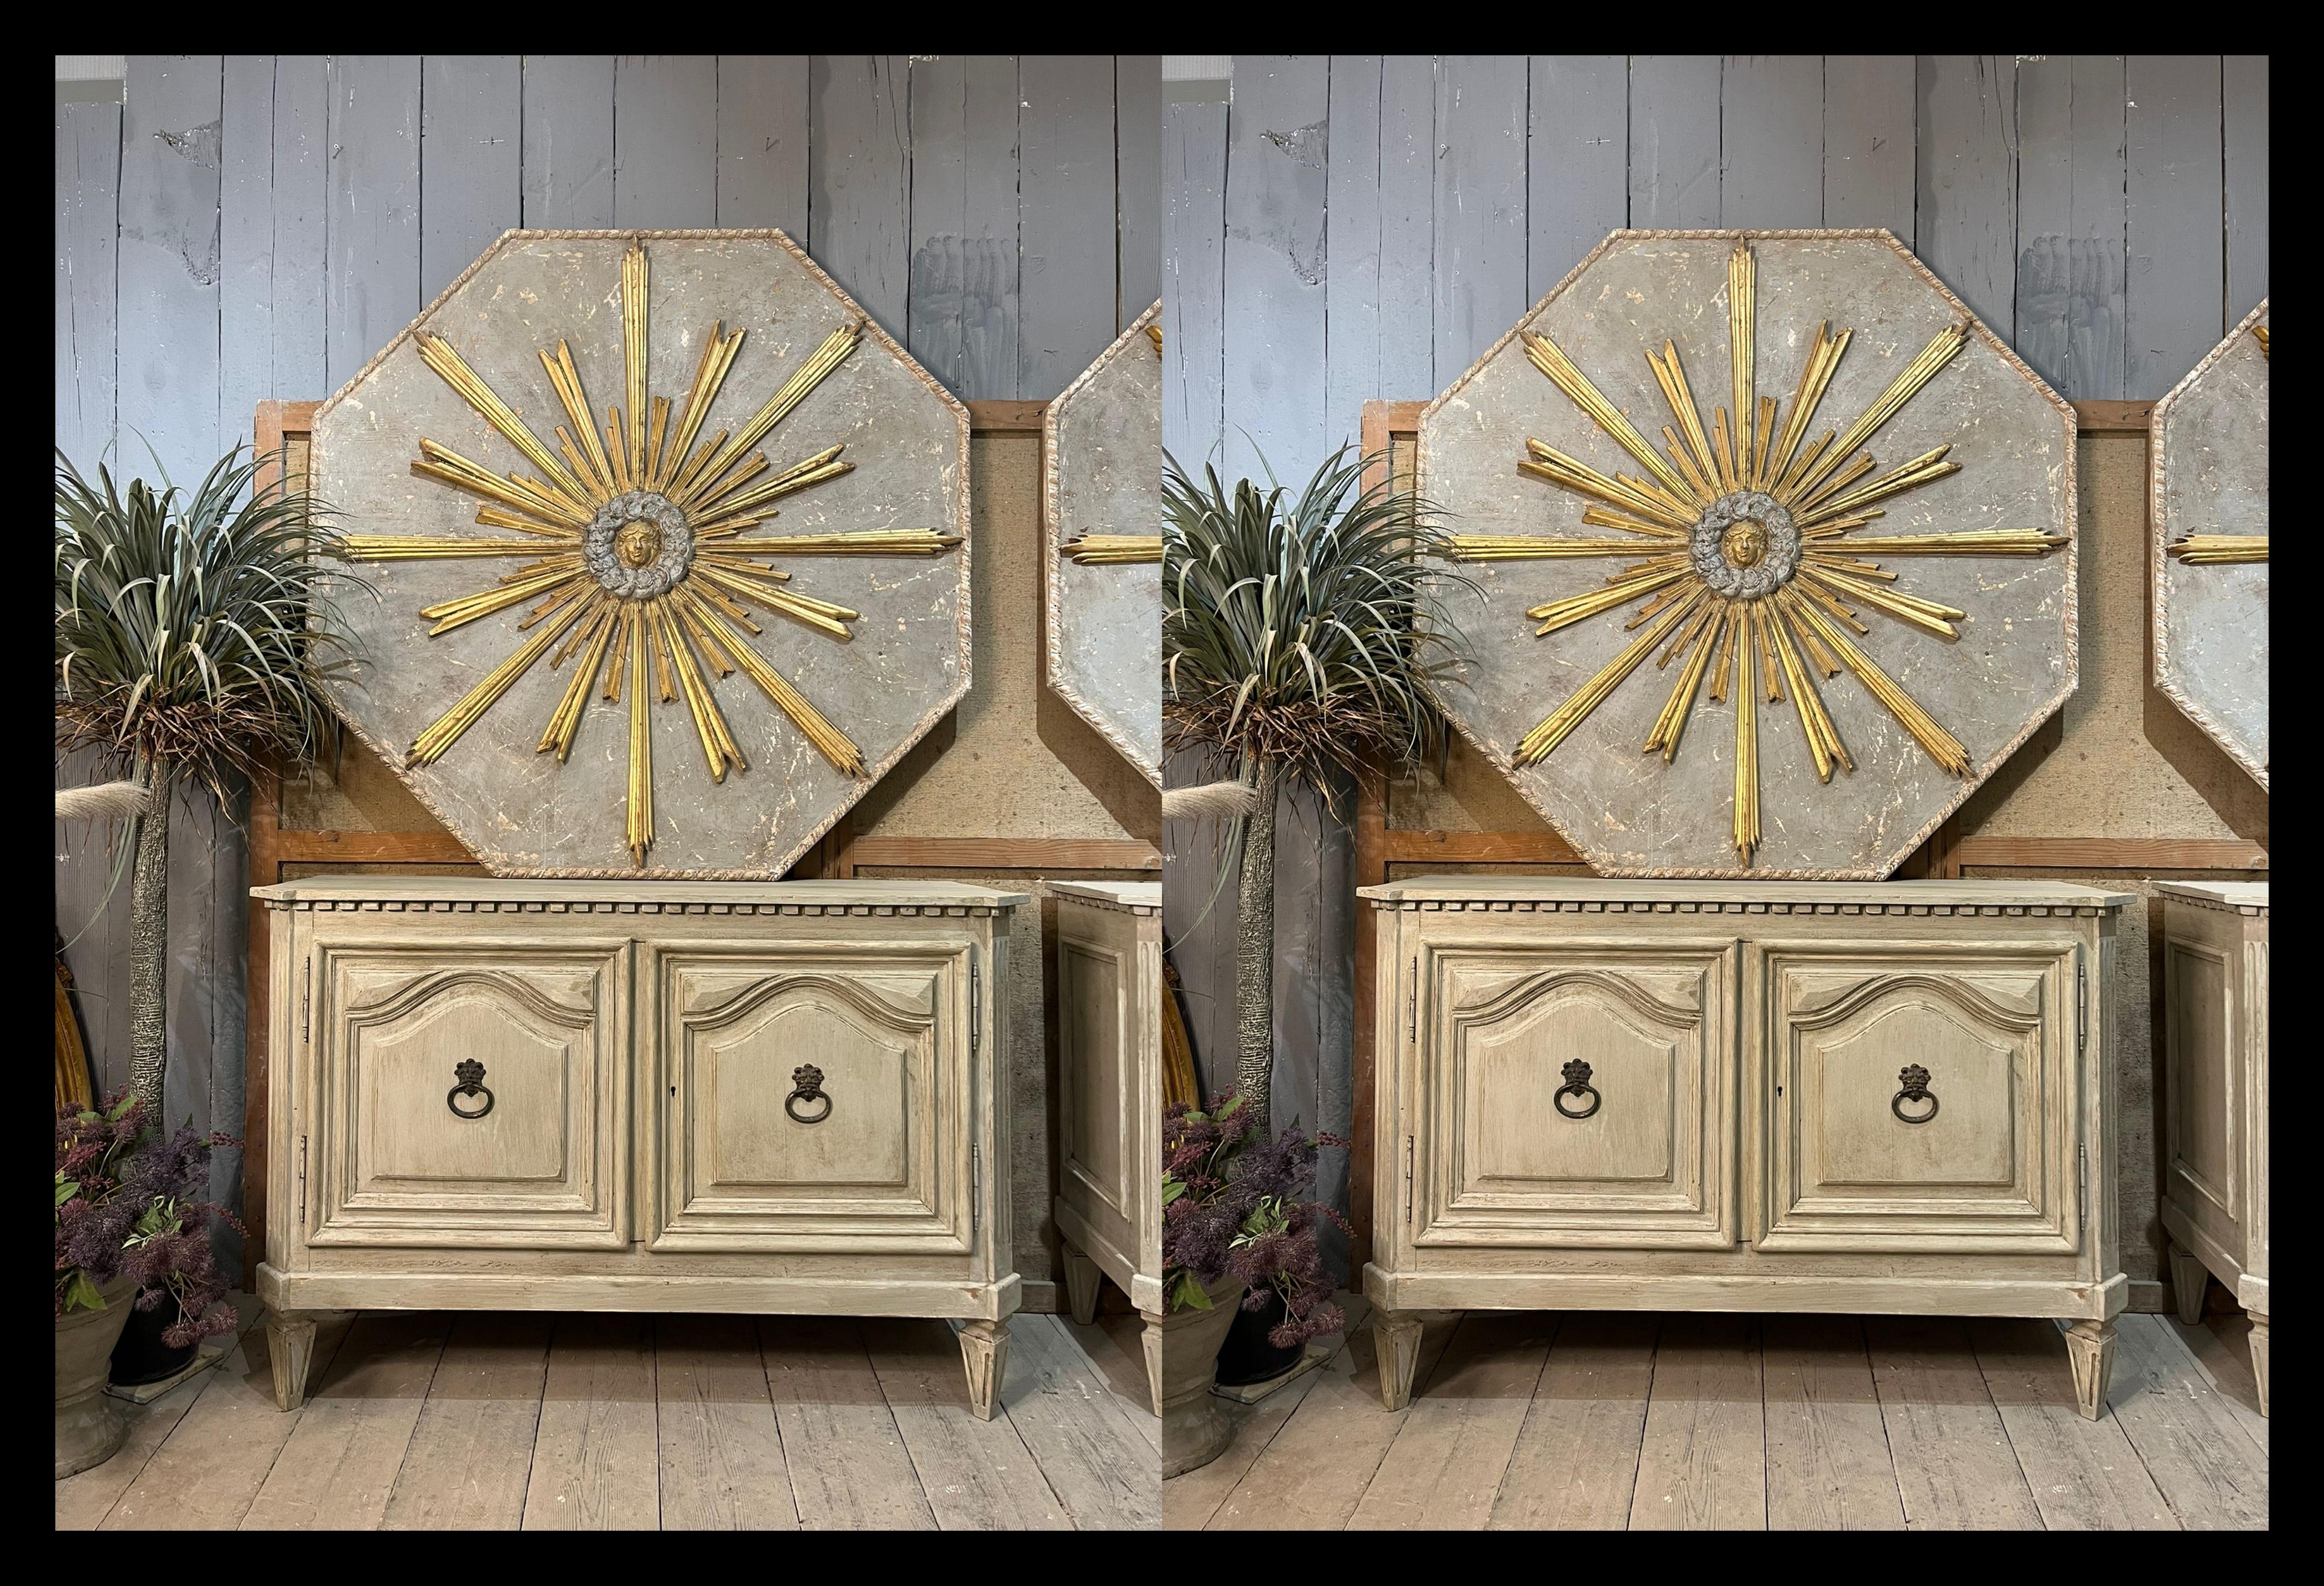 Beautiful Pair of Italian Chests of Drawers early 20th Century
Pine wood
perfectly preserved
Measurements with the upper floor:
144cm x 51cm x 2.5cm h: 97cm

The wood panels have 125cm diameter 
